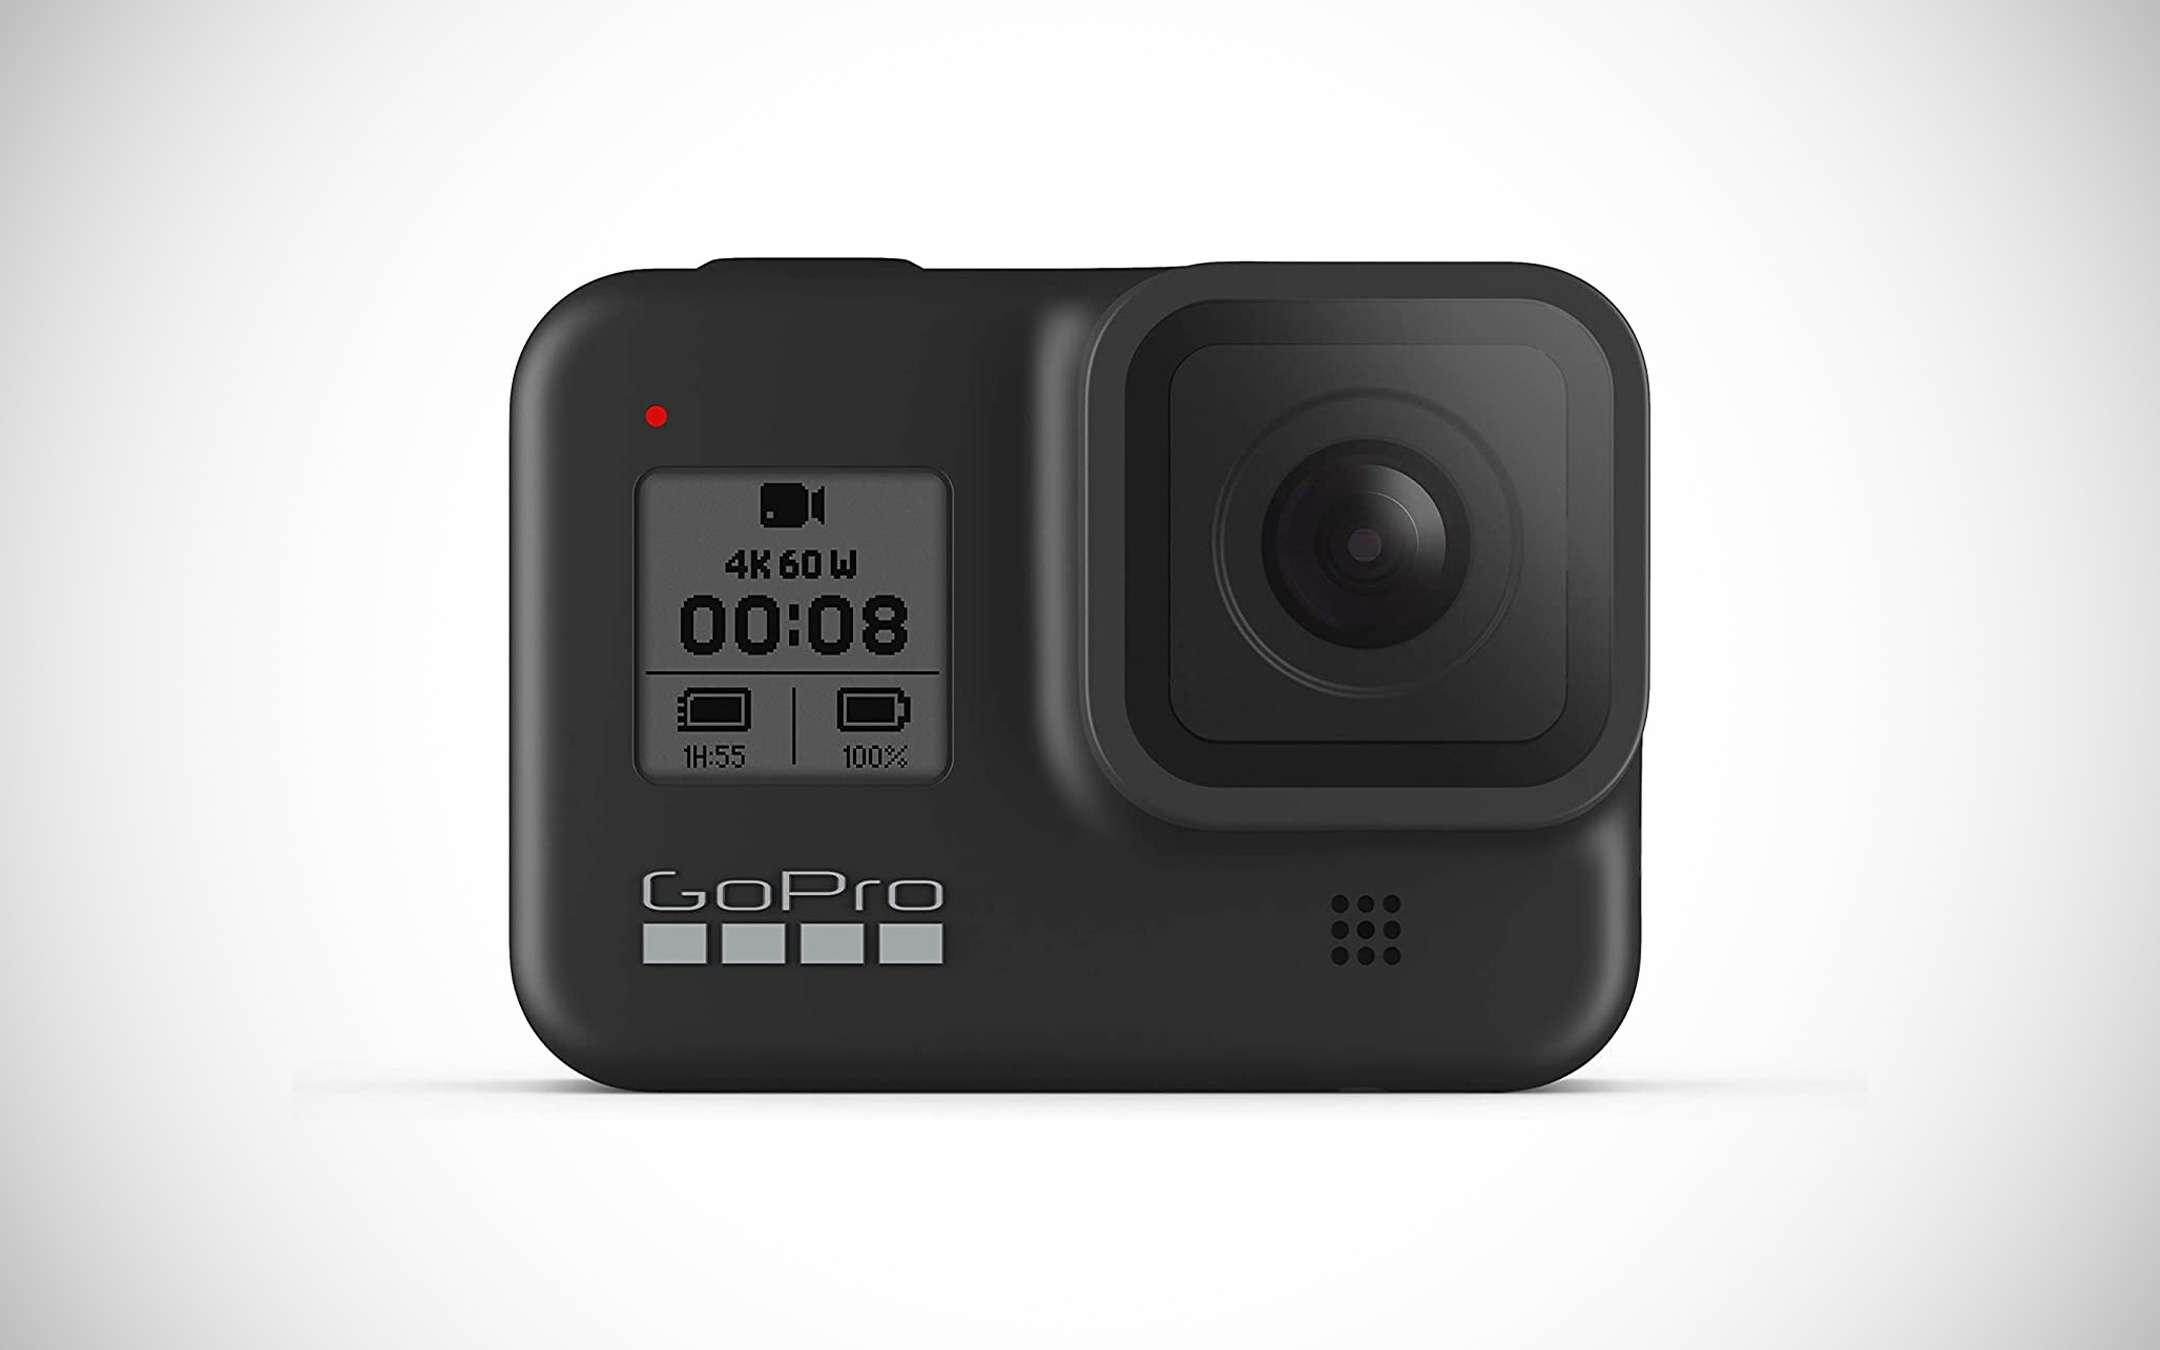 How to turn the GoPro into a webcam